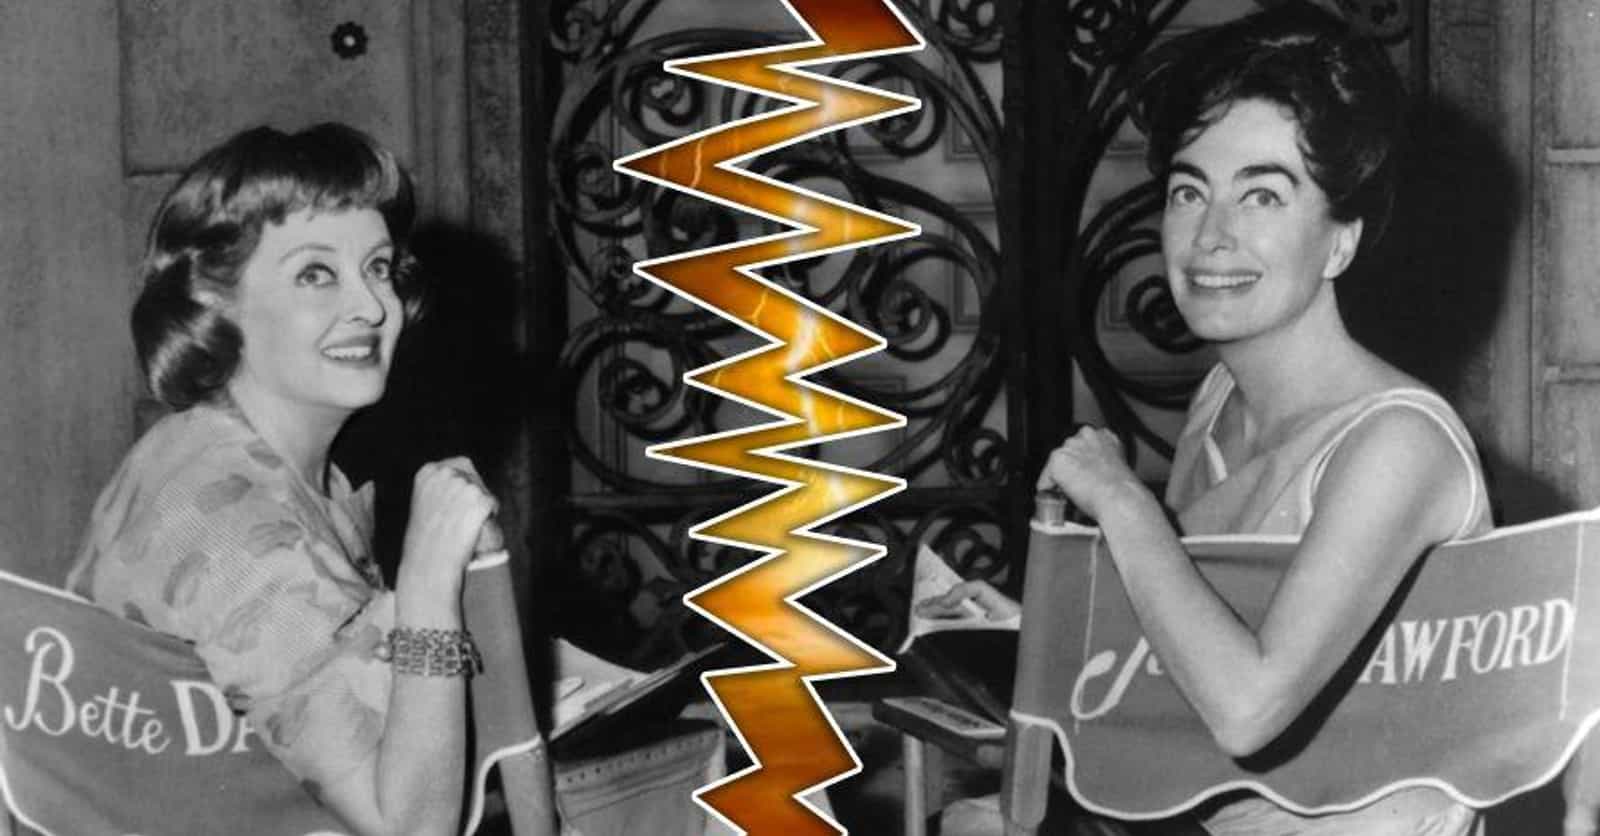 Why Did Bette Davis And Joan Crawford Have A Legendary Feud?